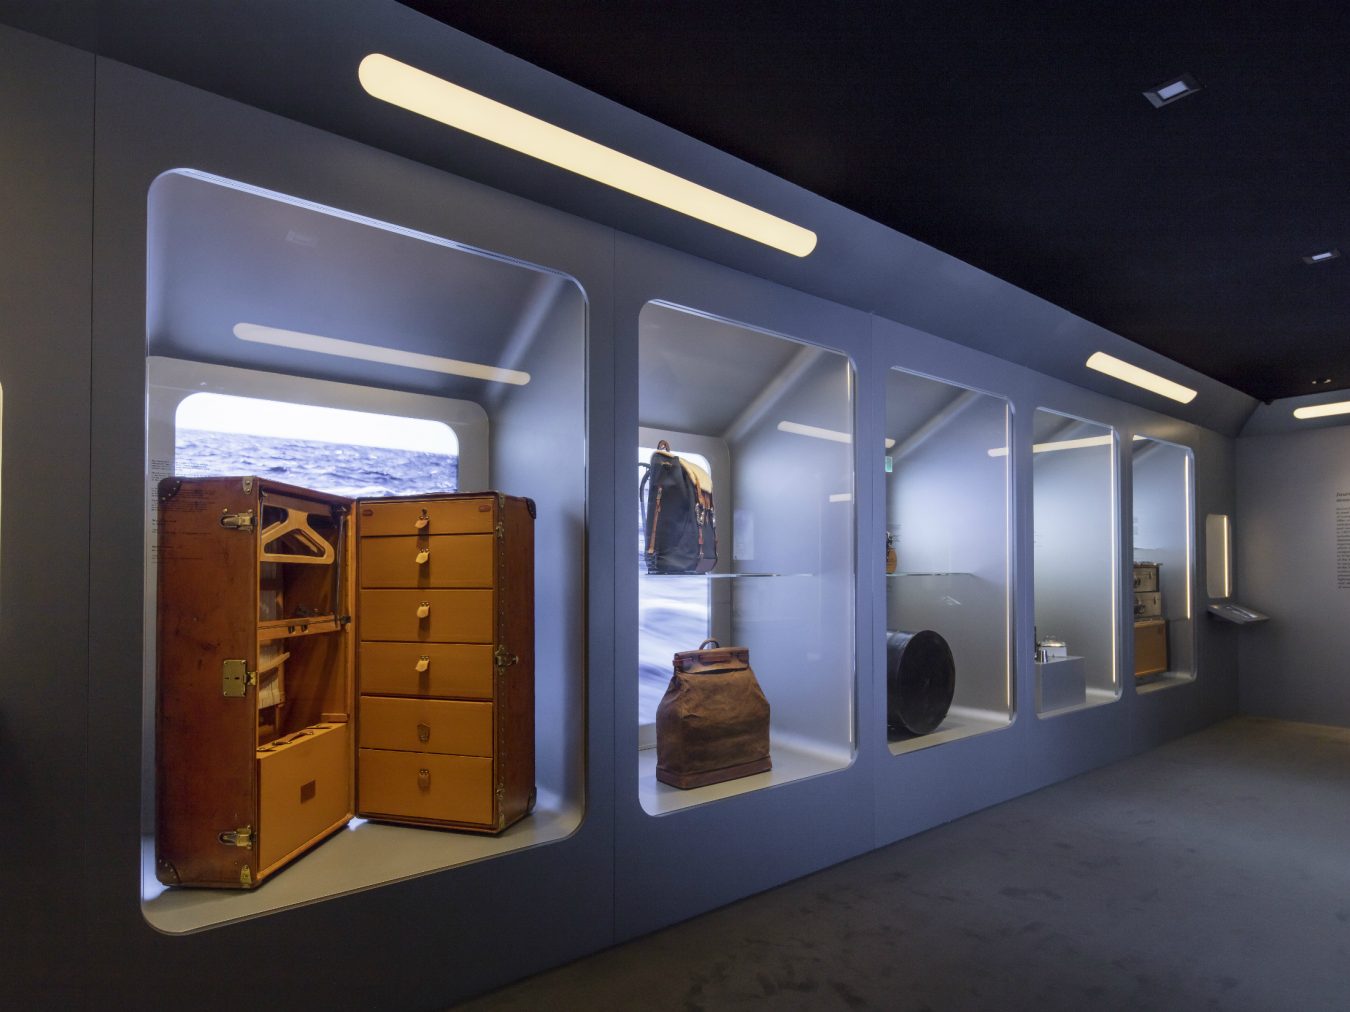 Louis Vuitton's 'Time Capsule' showcases the brand's rich heritage